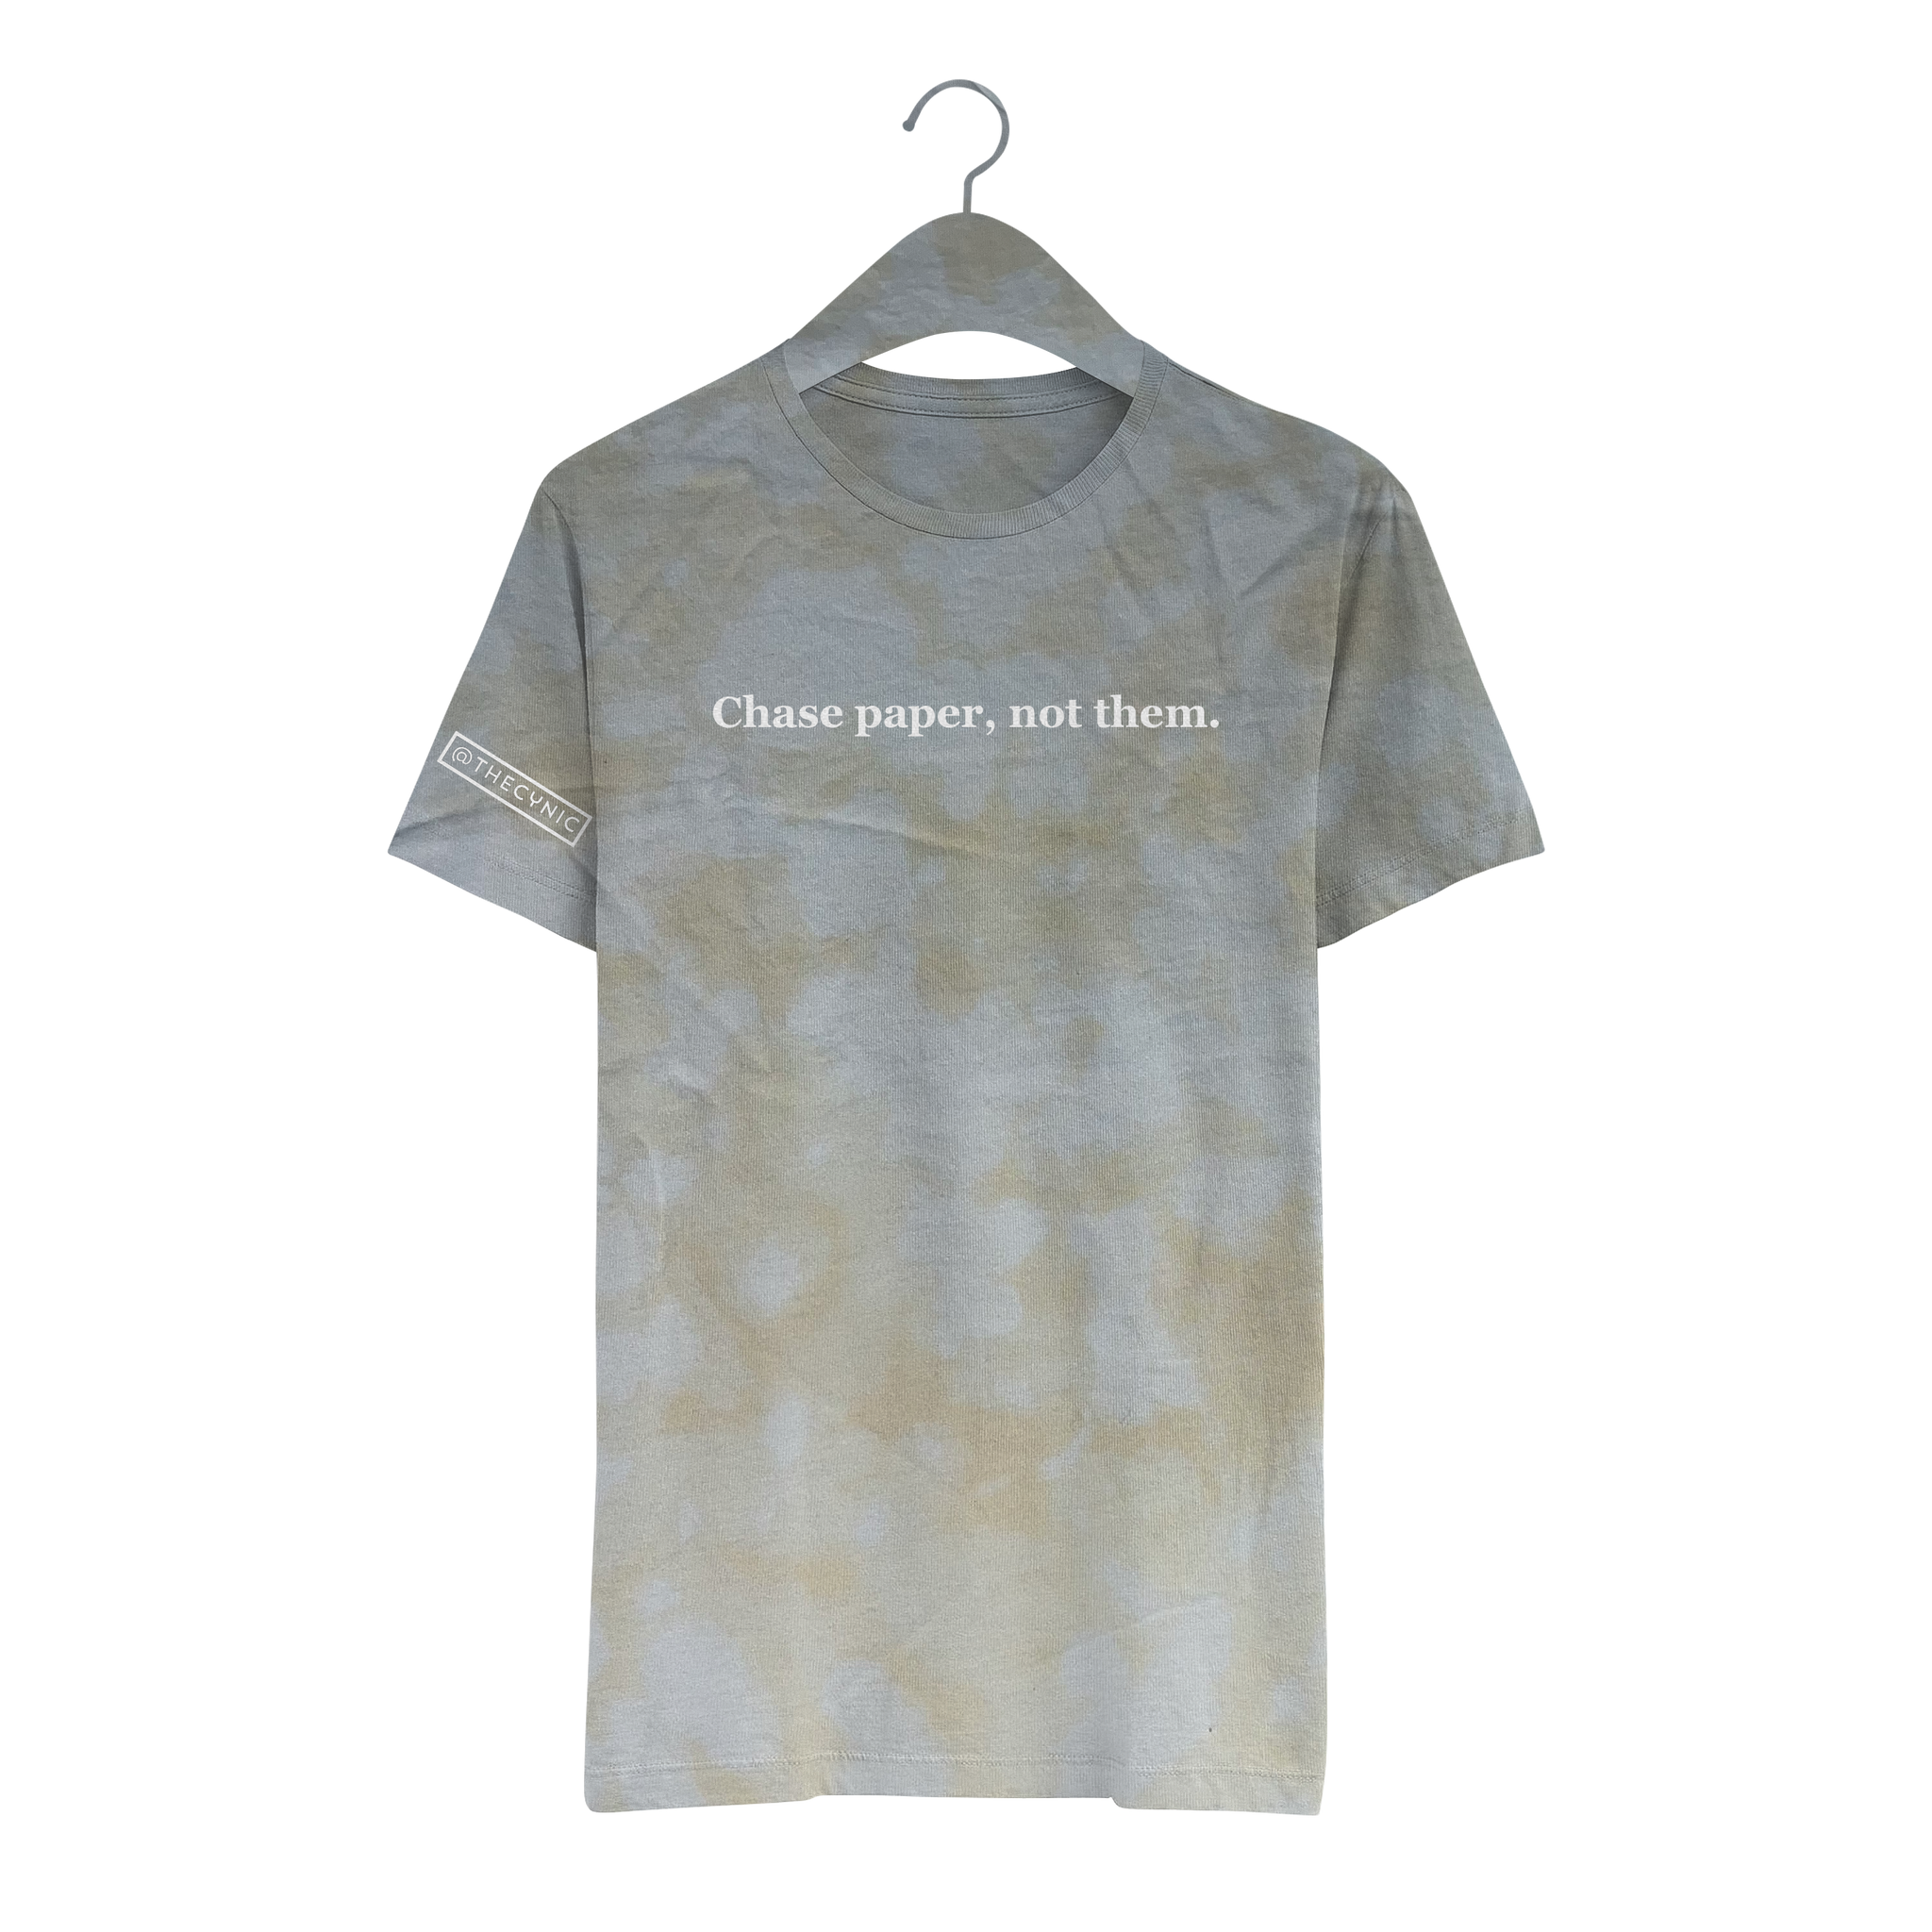 Chase paper, not them. - Unisex Tee